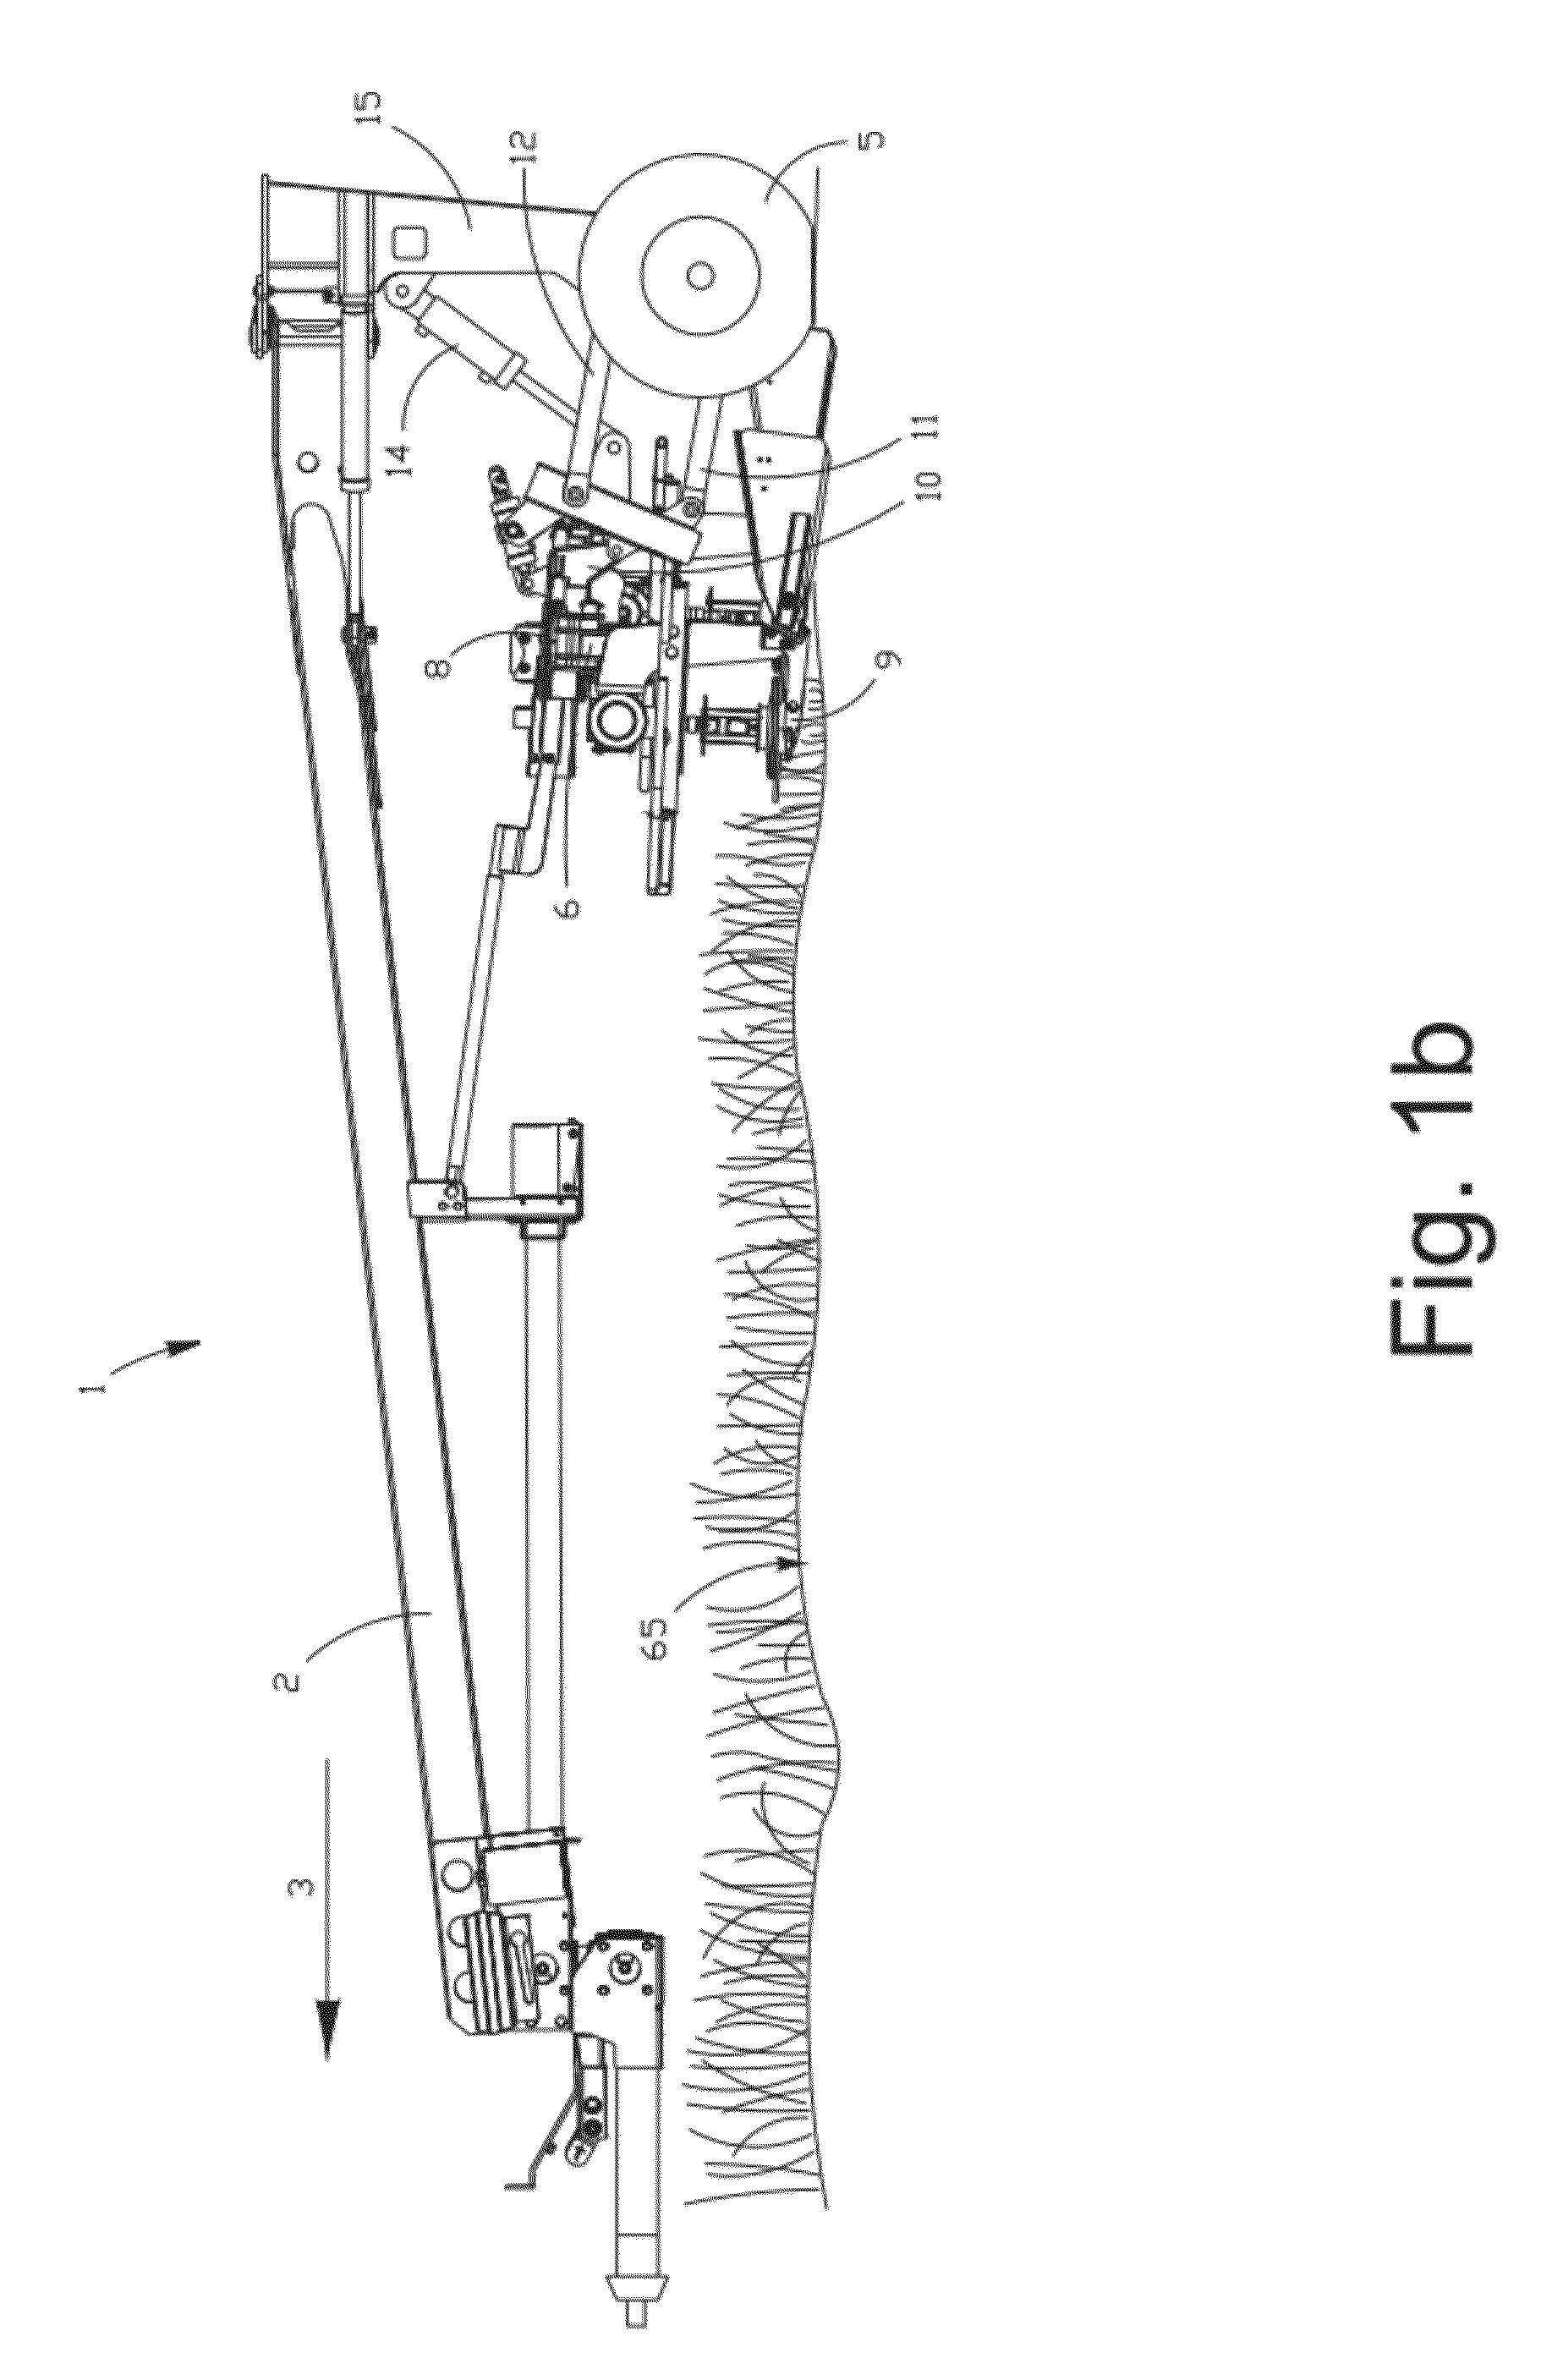 Self-leveling four-bar linkage for suspending a header of an agricultural implement